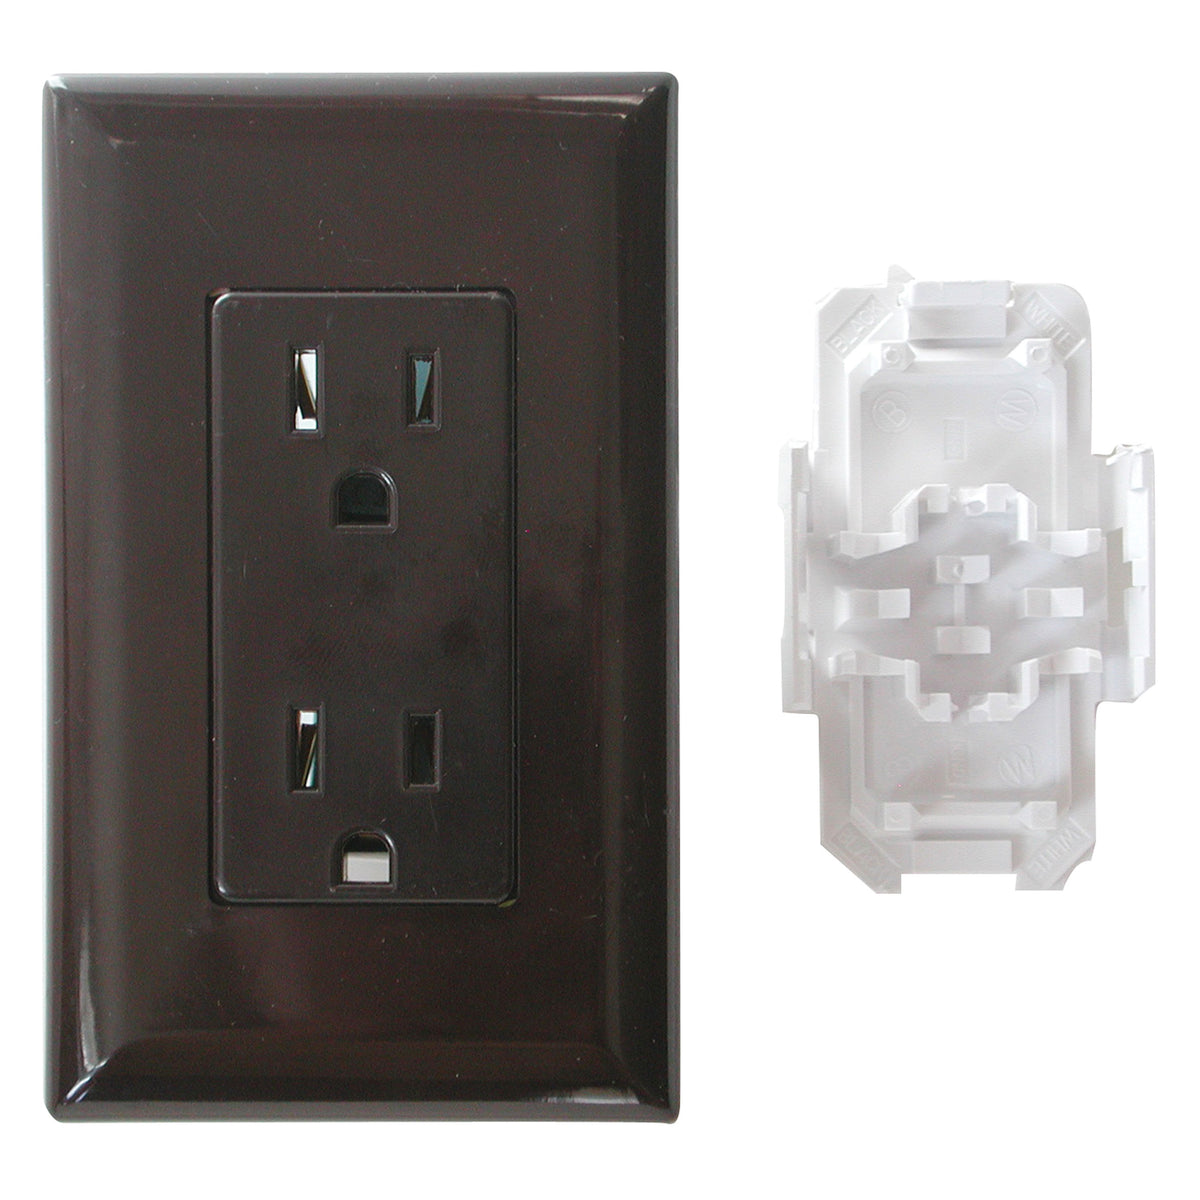 Diamond Group by Valterra DG15BRVP Decor Receptacle with Cover - 15A, 125V, Brown